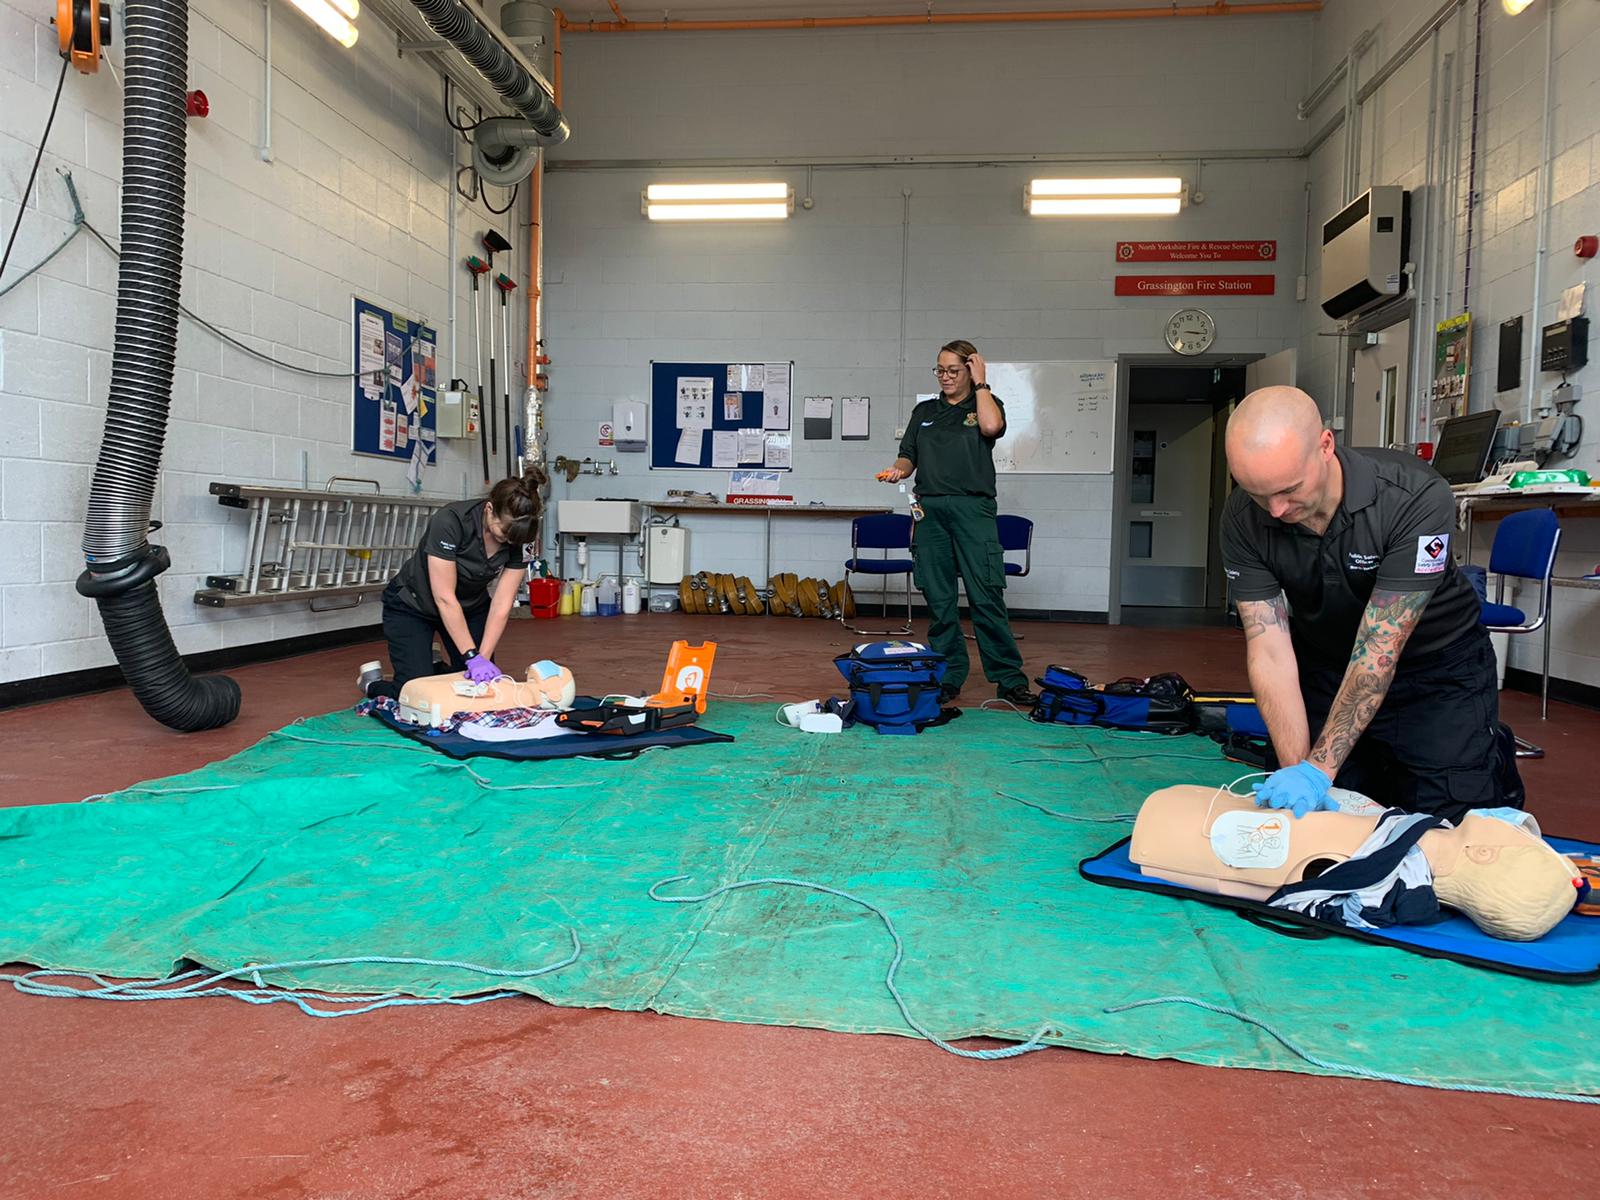 two public safety officers carrying out cpr on dummies with member of Yorkshire ambulance service